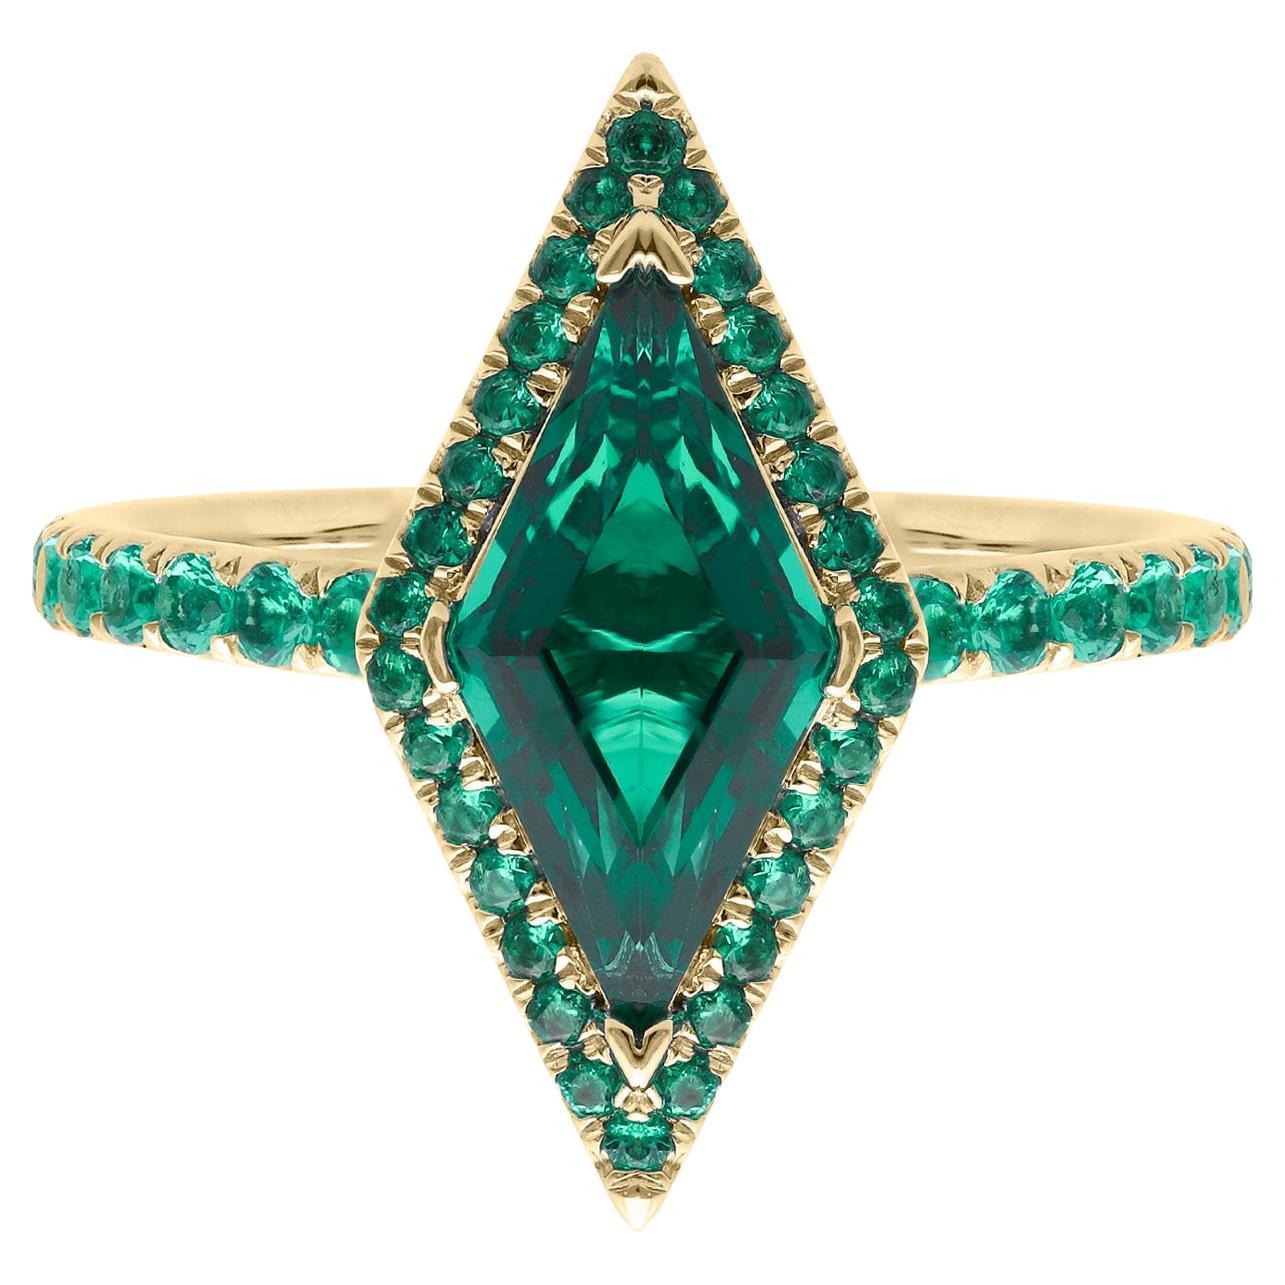 For Sale:  1.50 Carat Emerald Lozenge Ring, Green, Round Emerald Pave, 10kt Yellow Gold